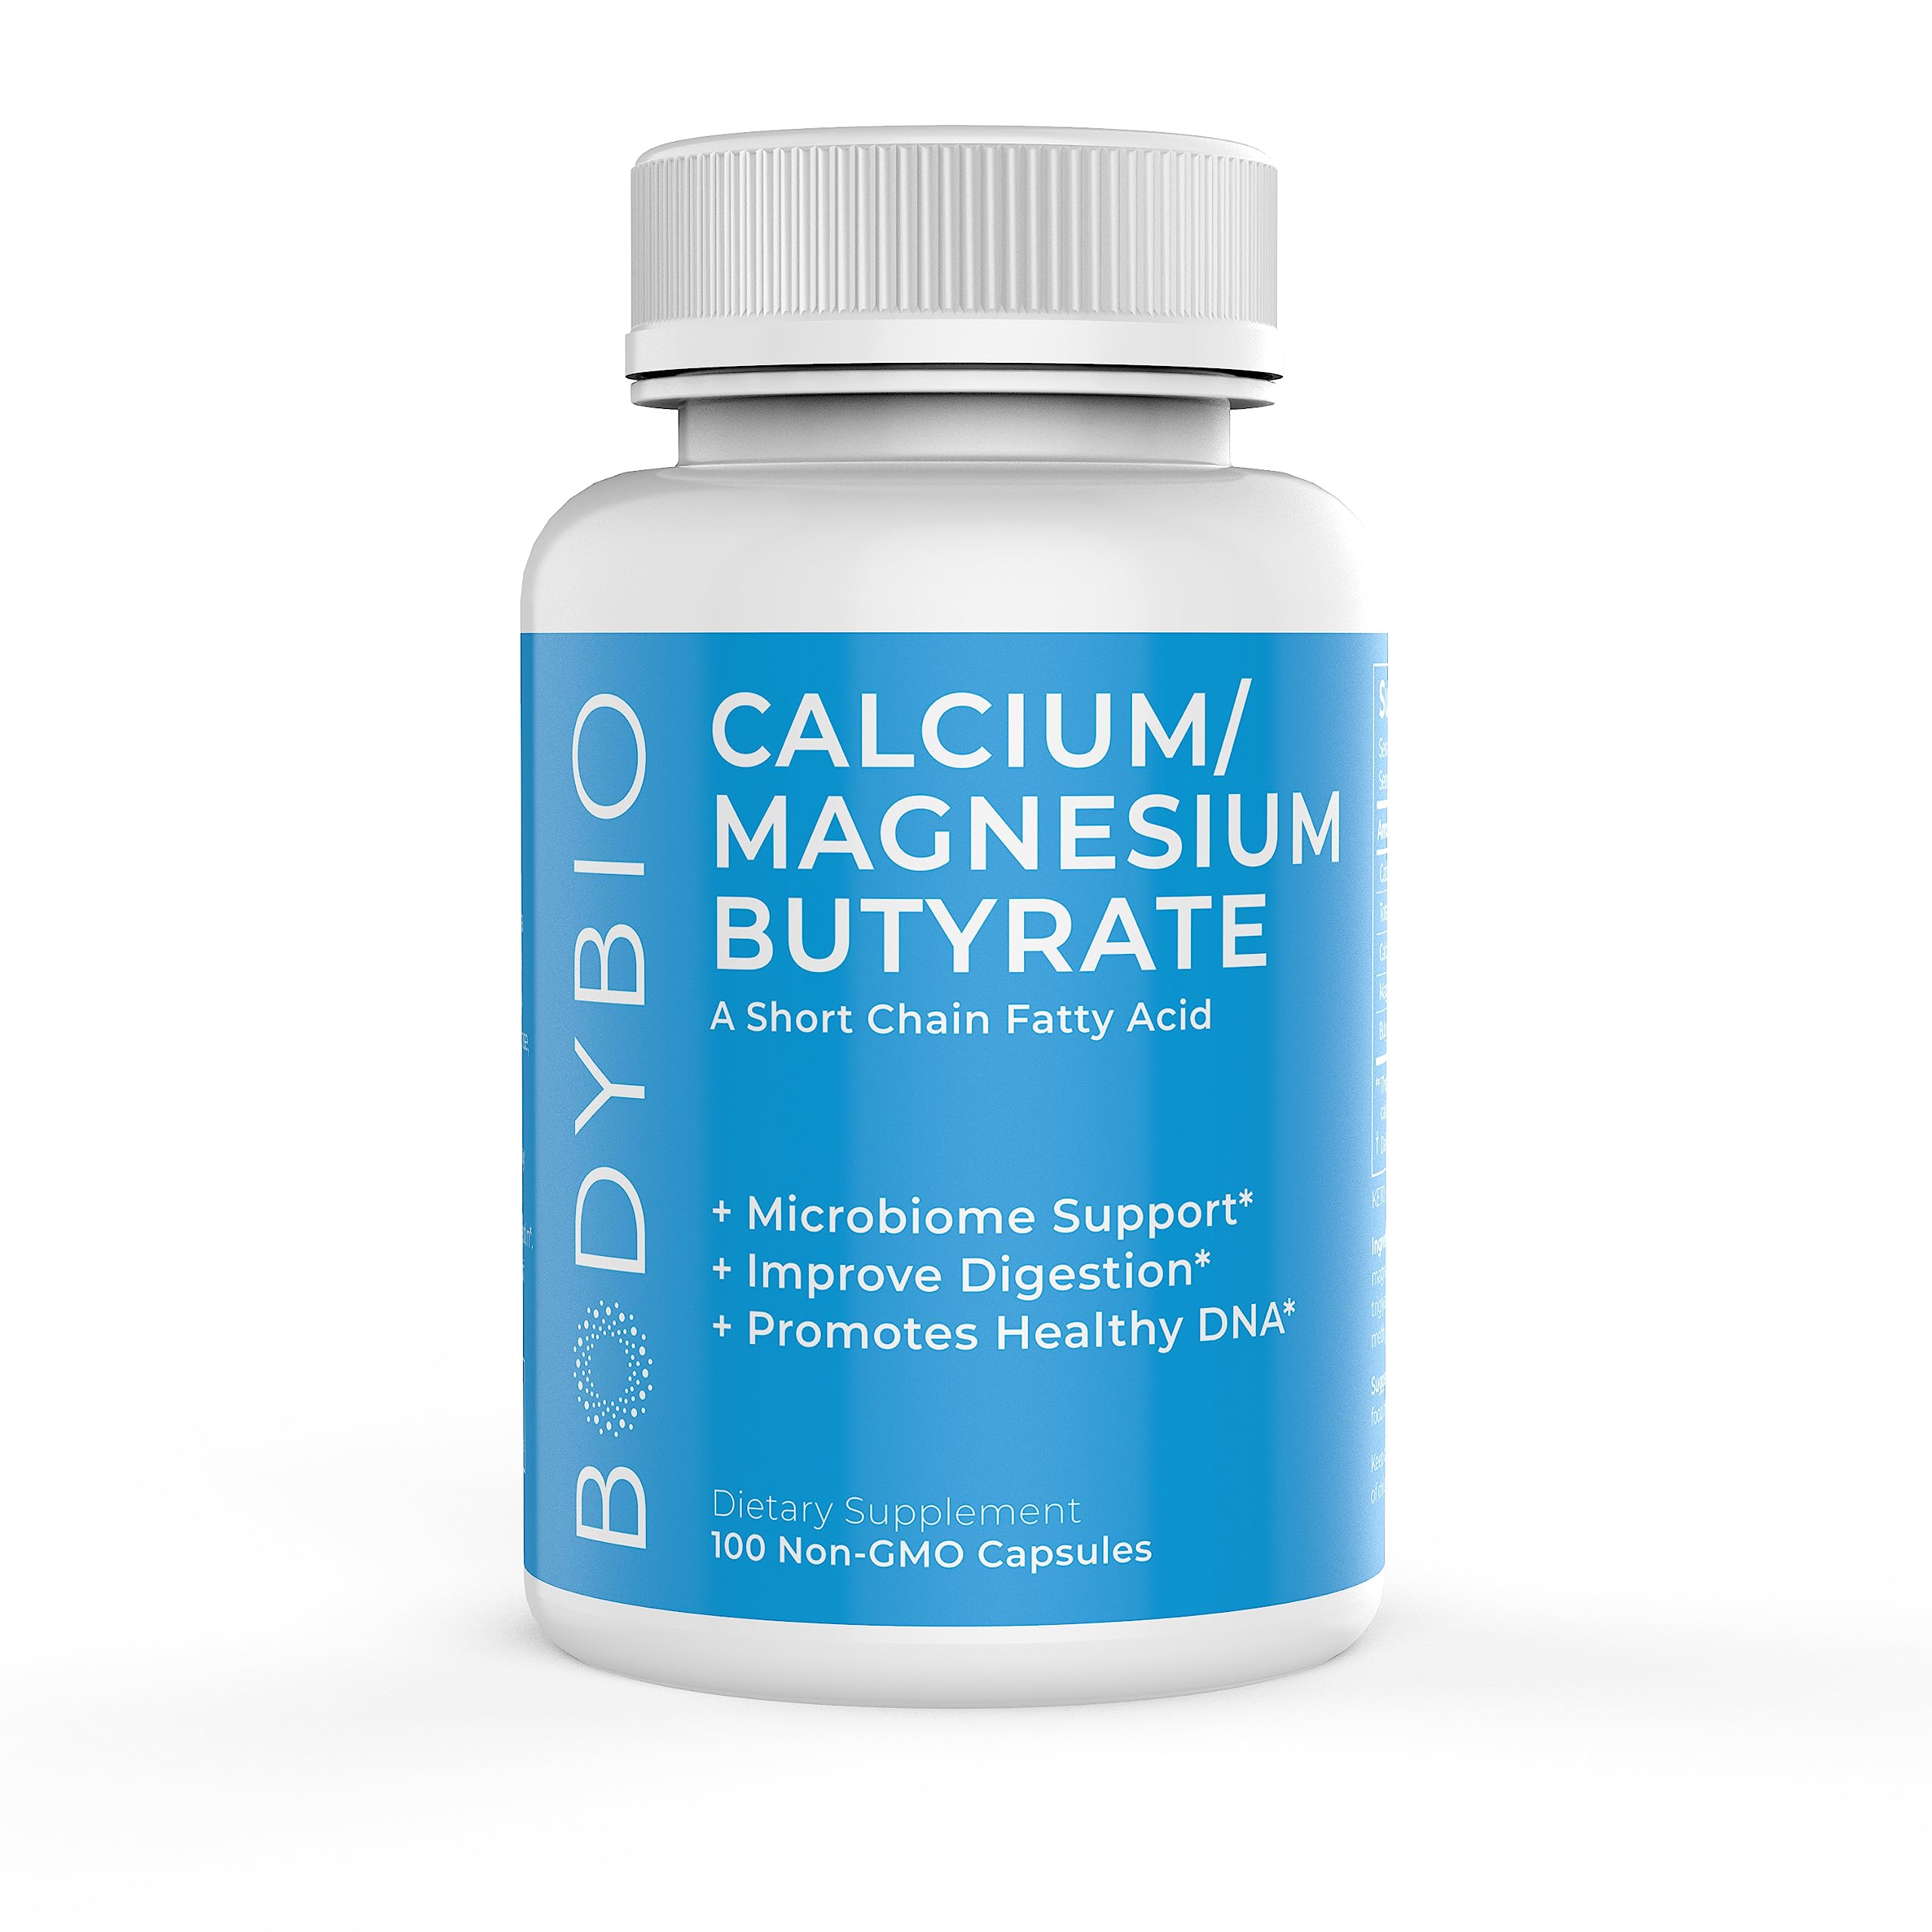 Book Cover BodyBio Butyrate with Calcium & Magnesium - Supports Healthy Digestion, Gut & Microbiome - Leaky Gut Repair - Control Bloating - Fuel for Healthy Gut - 100 Capsules 100 Count (Pack of 1)